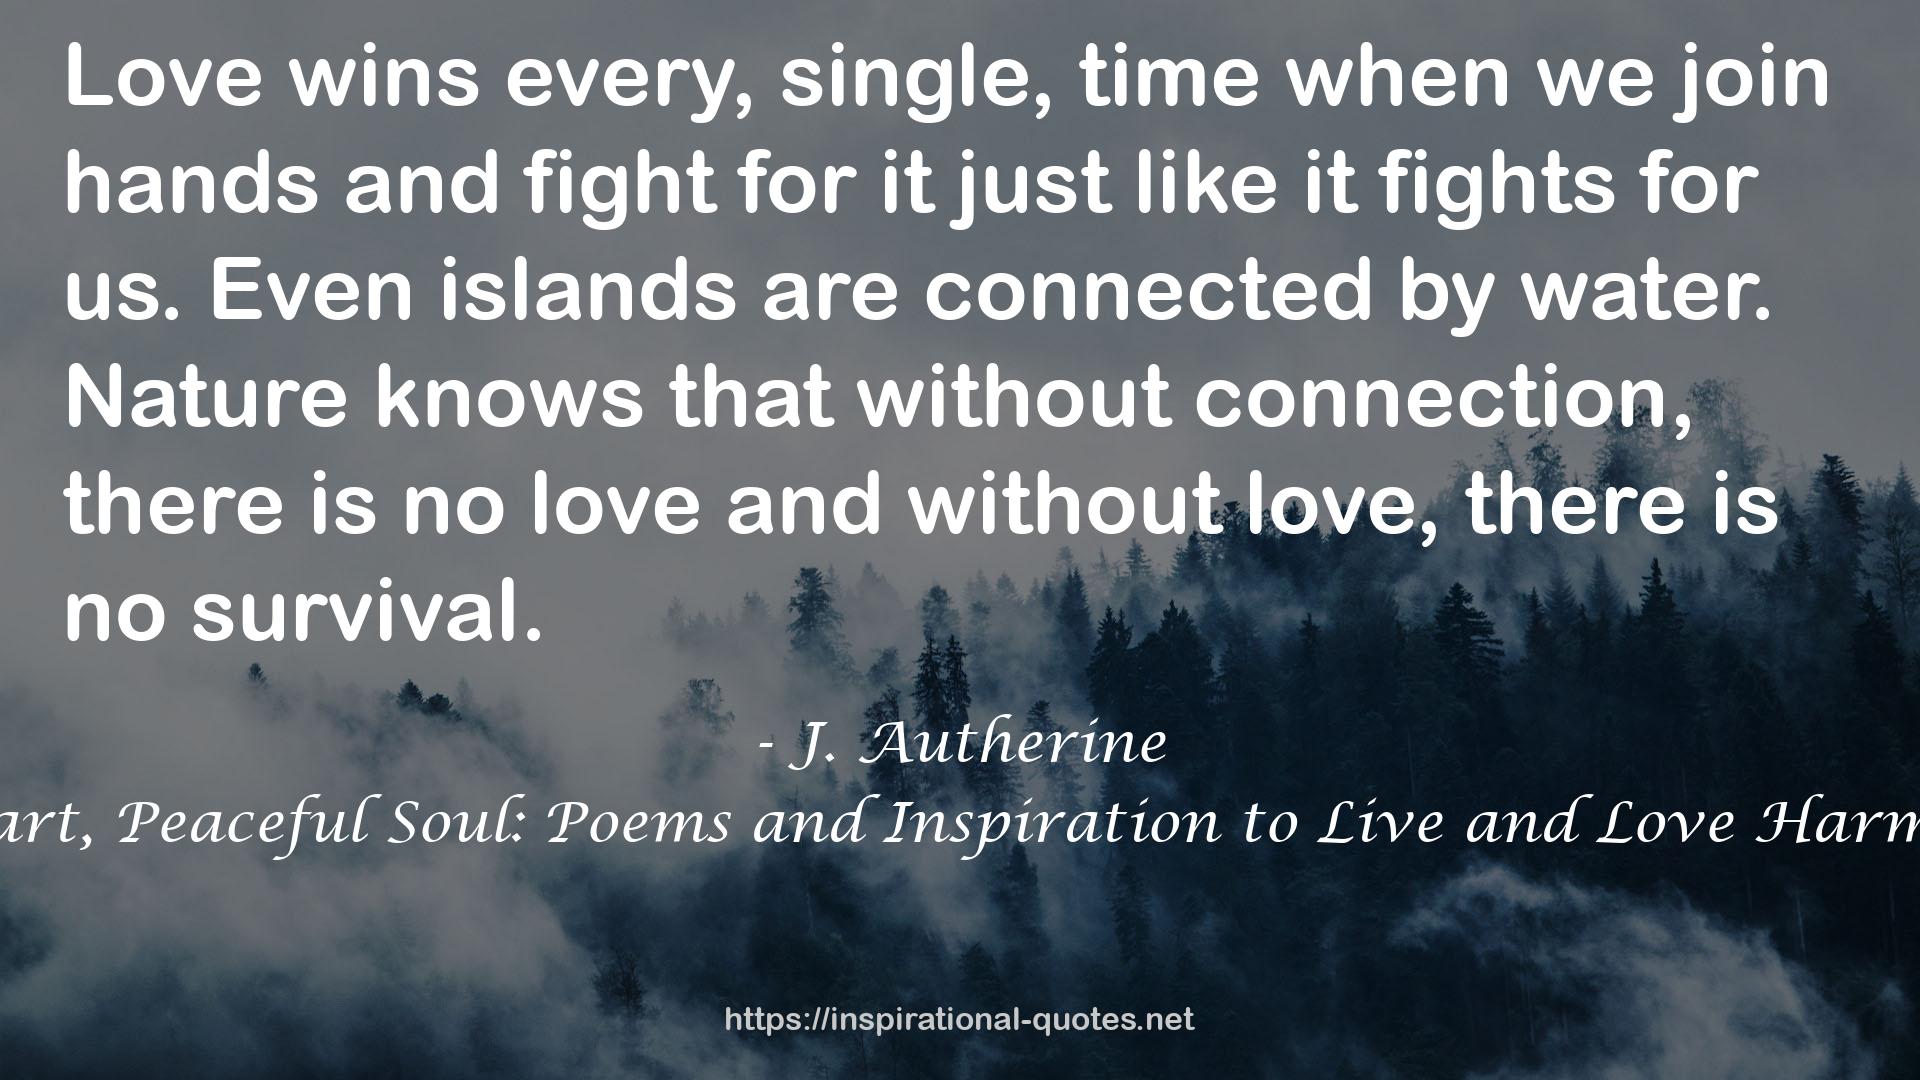 Wild Heart, Peaceful Soul: Poems and Inspiration to Live and Love Harmoniously QUOTES